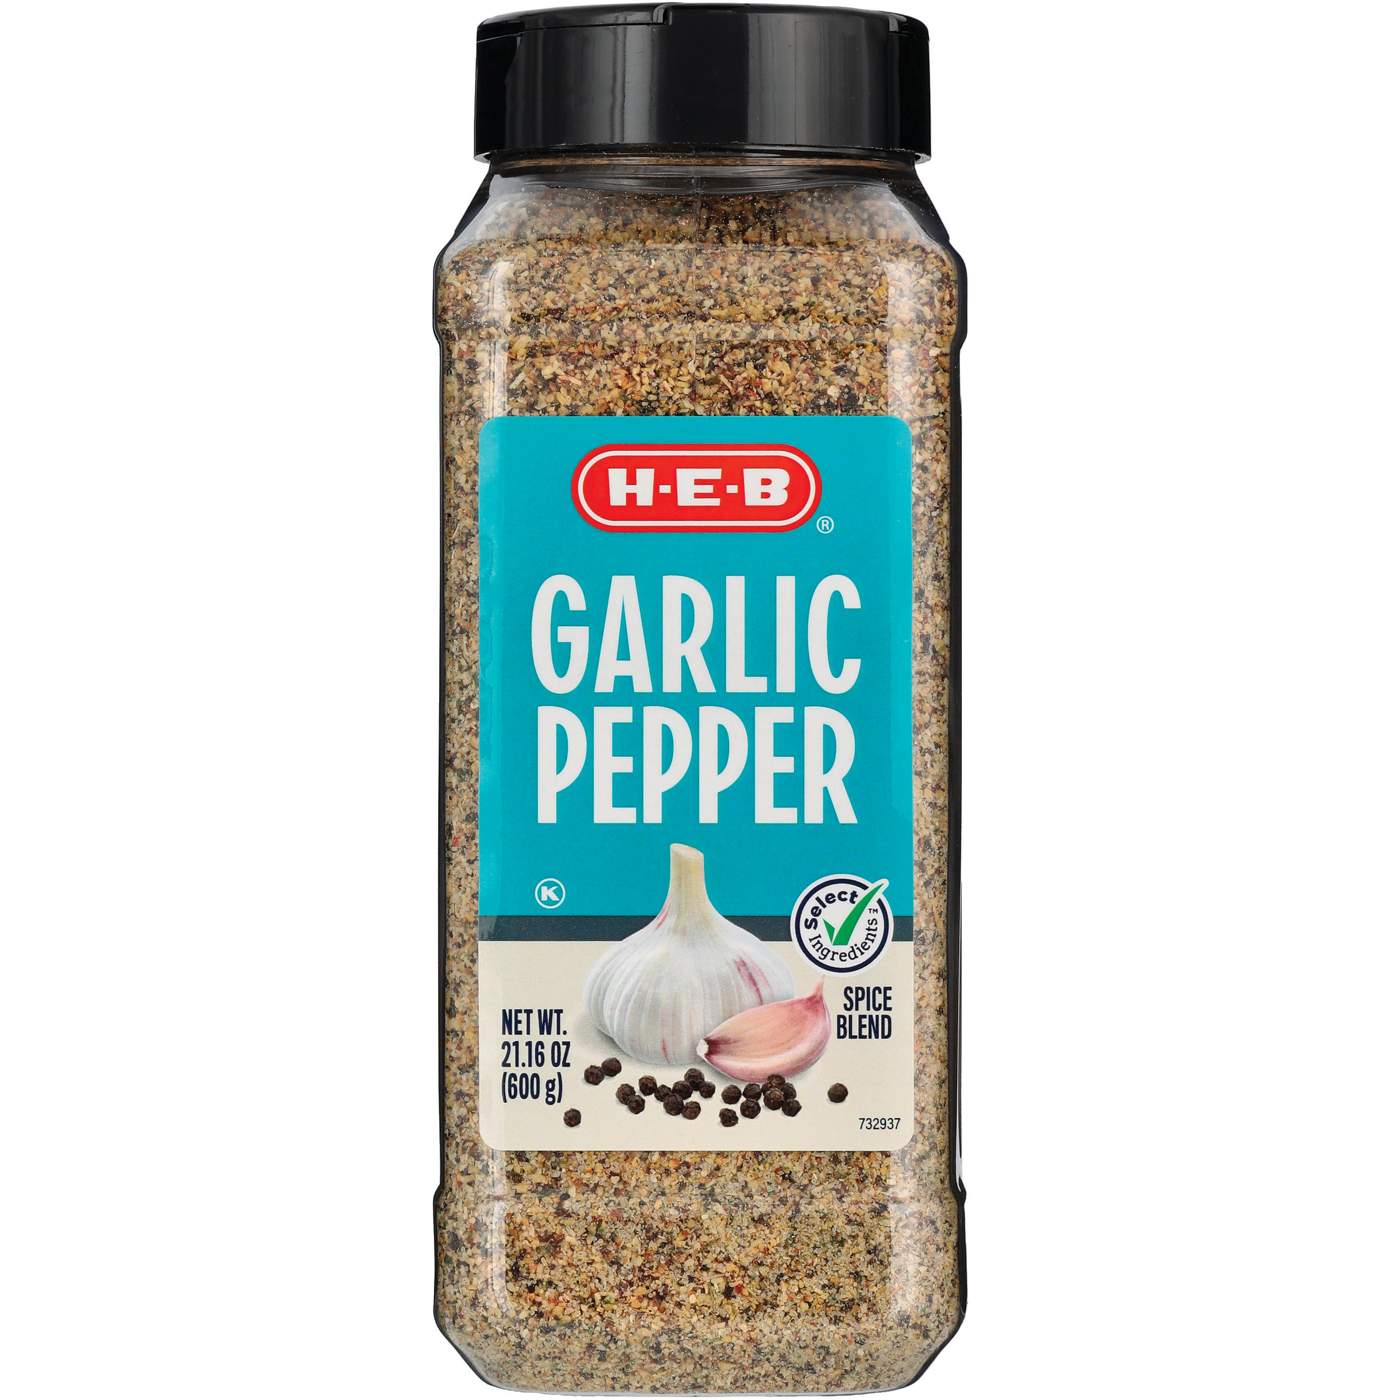 H-E-B Garlic Pepper Spice Blend – Texas-Size Pack; image 1 of 2